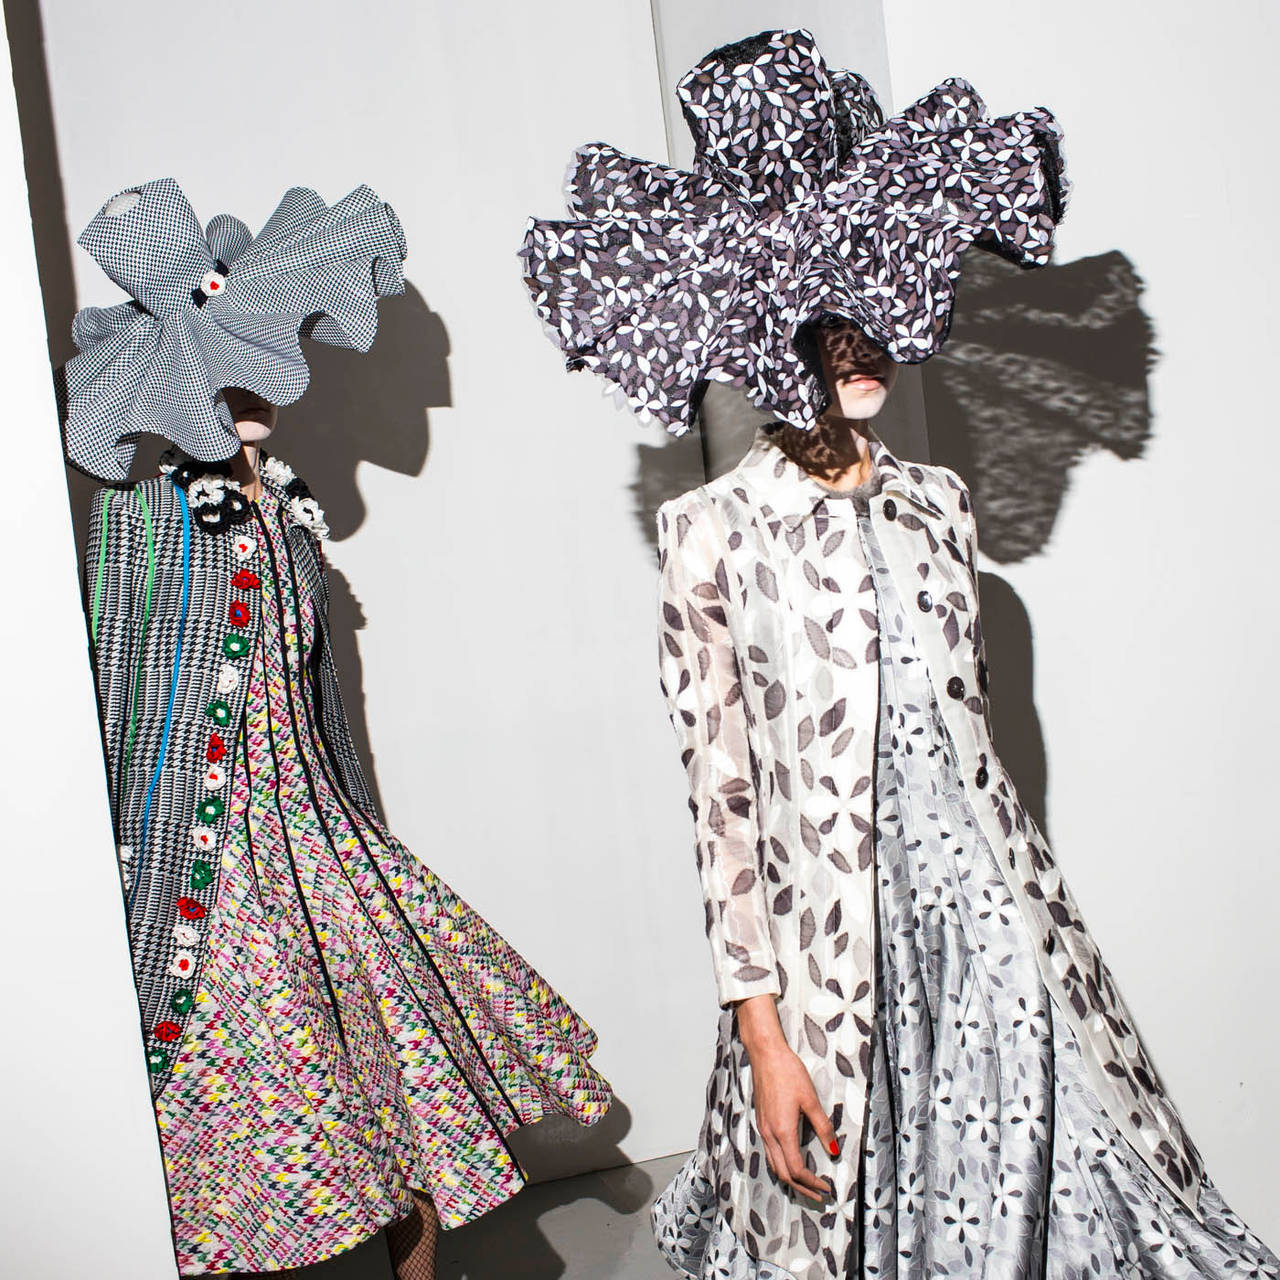 Landon Nordeman Color Photograph - Thom Browne No. 2 (Hats), from the OUT OF FASHION series